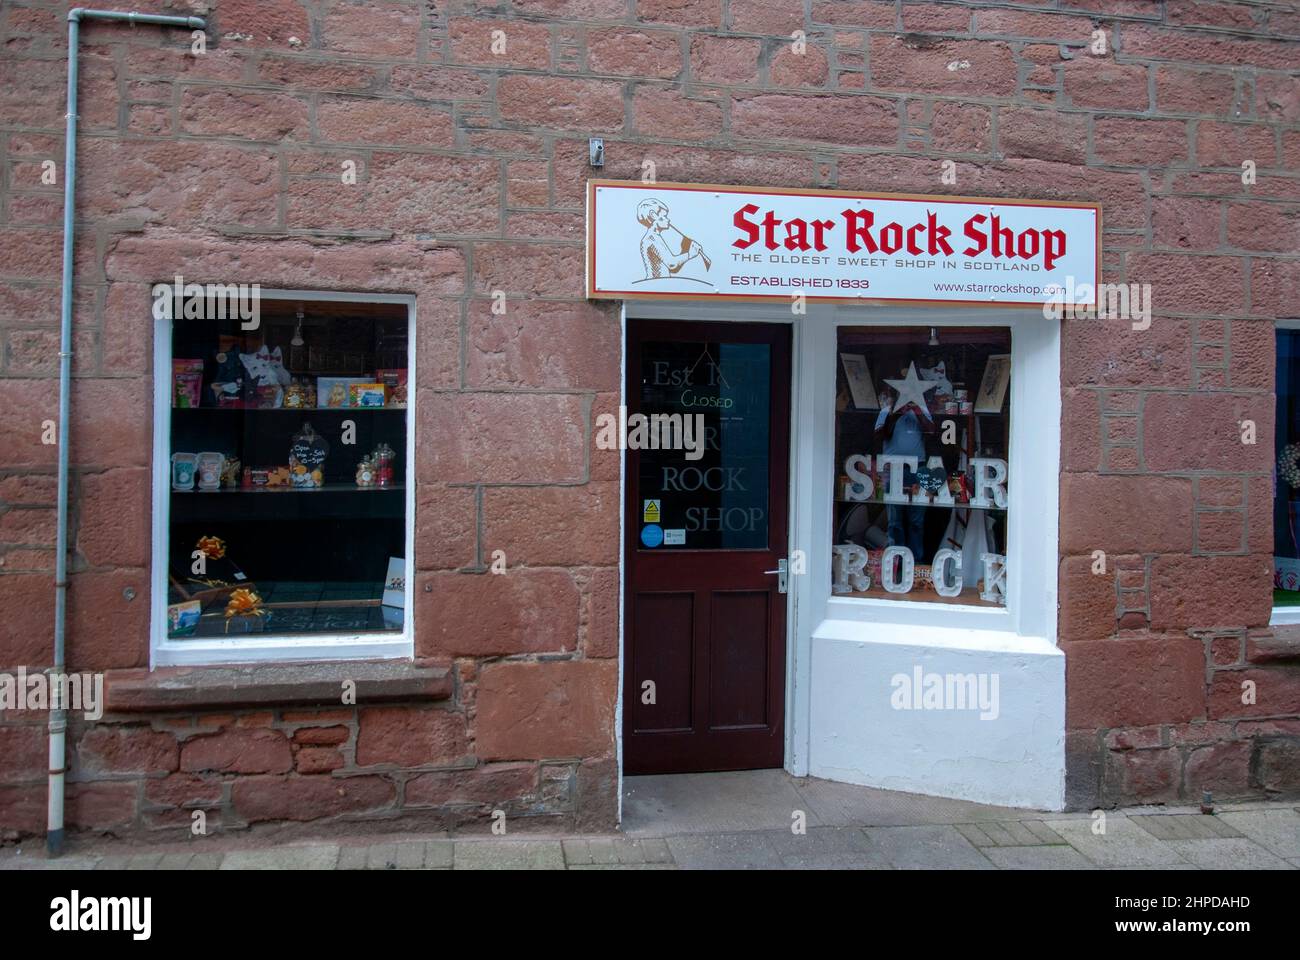 Star Rock Shop Oldest Sweet Shop in Scotland Roods Kirriemuir Angus Scotland United Kingdom exterior view red sandstone double fronted commercial reta Stock Photo